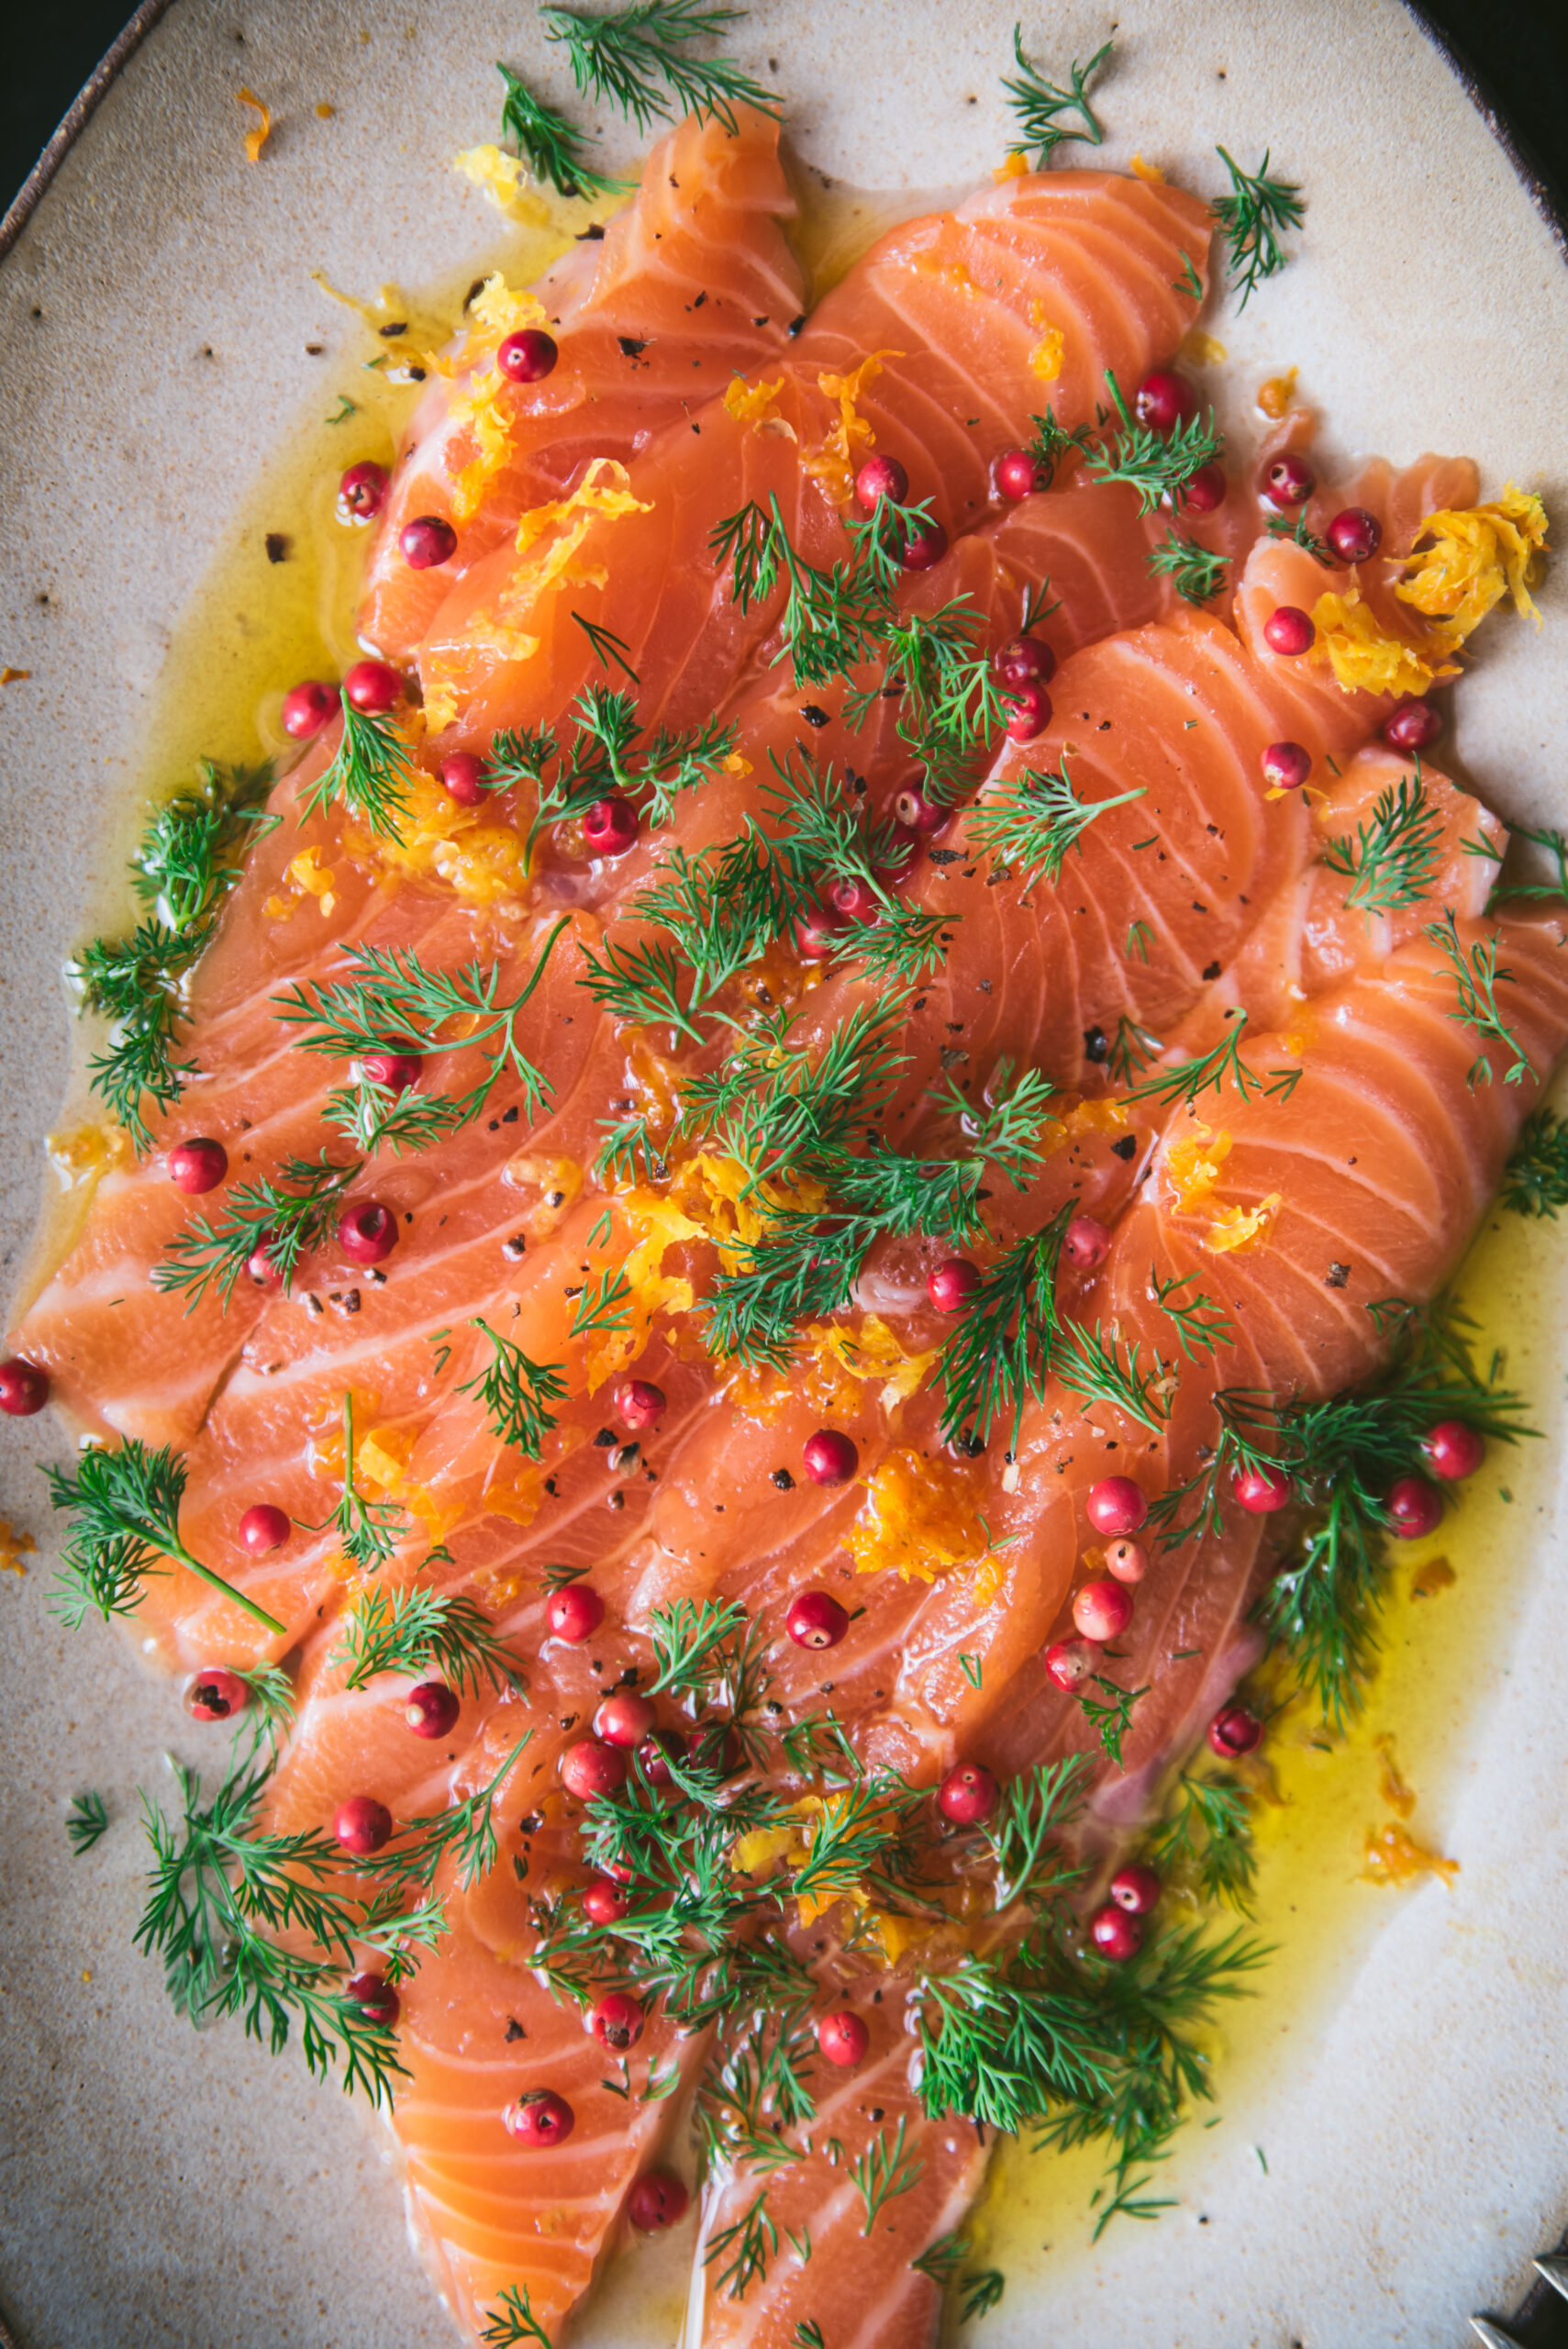 Raw salmon marinated with lemon and dill